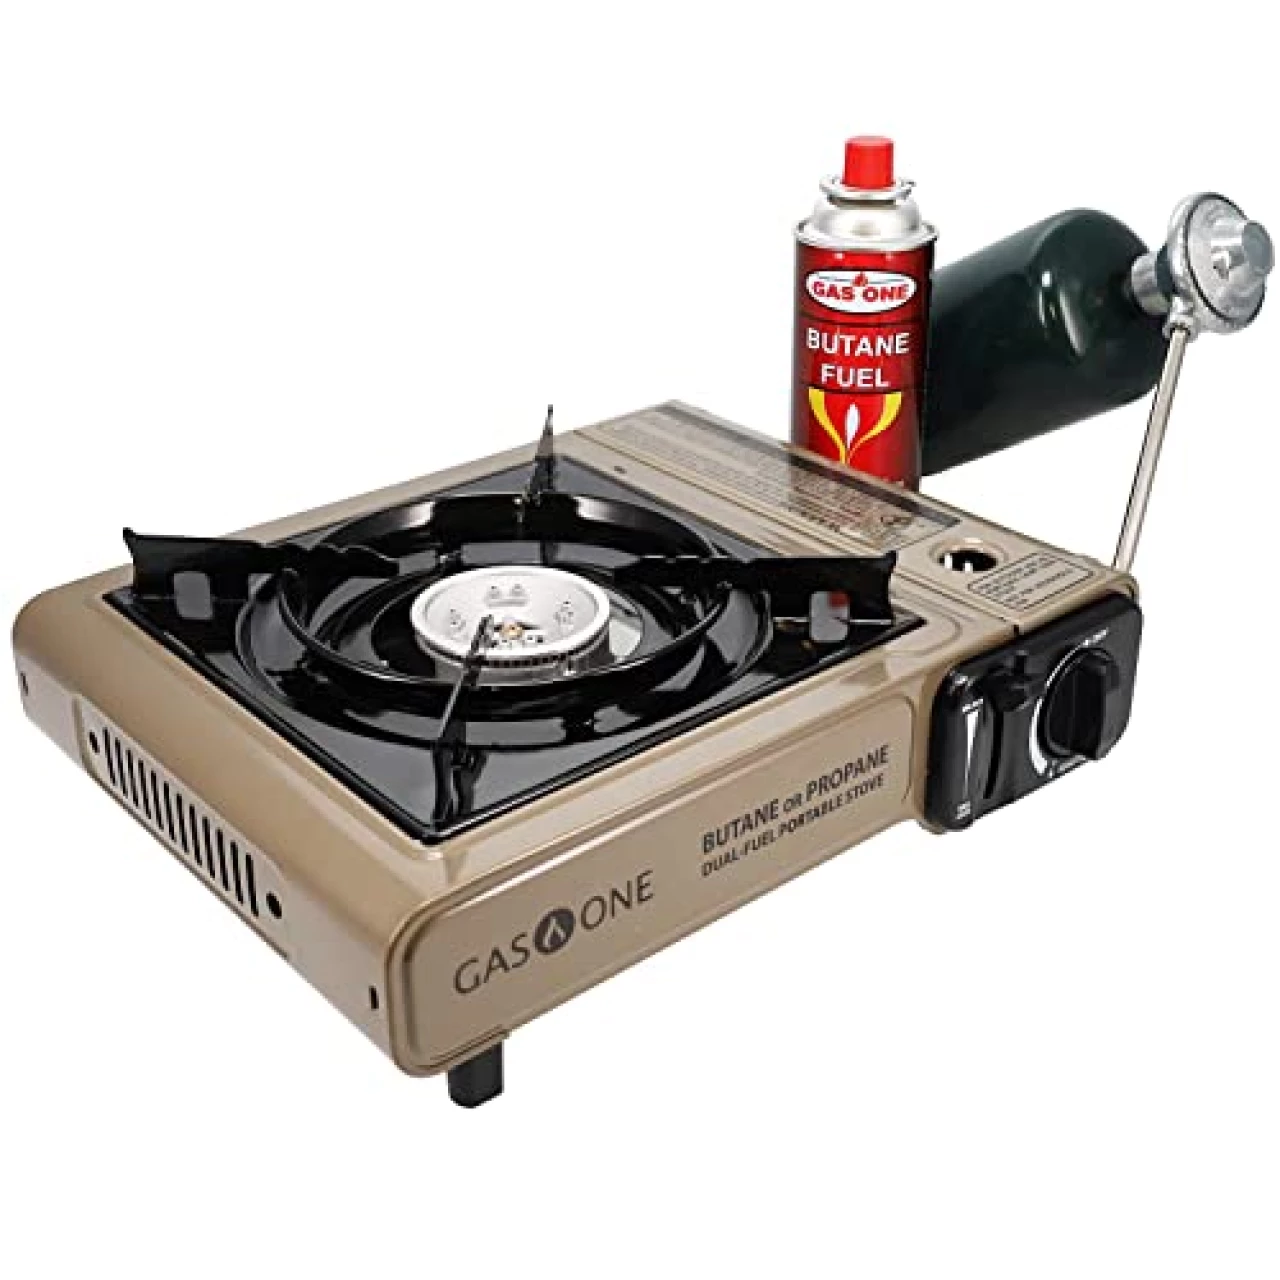 Gas One GS-3400P Propane or Butane Stove Dual Fuel Stove Portable Camping Stove